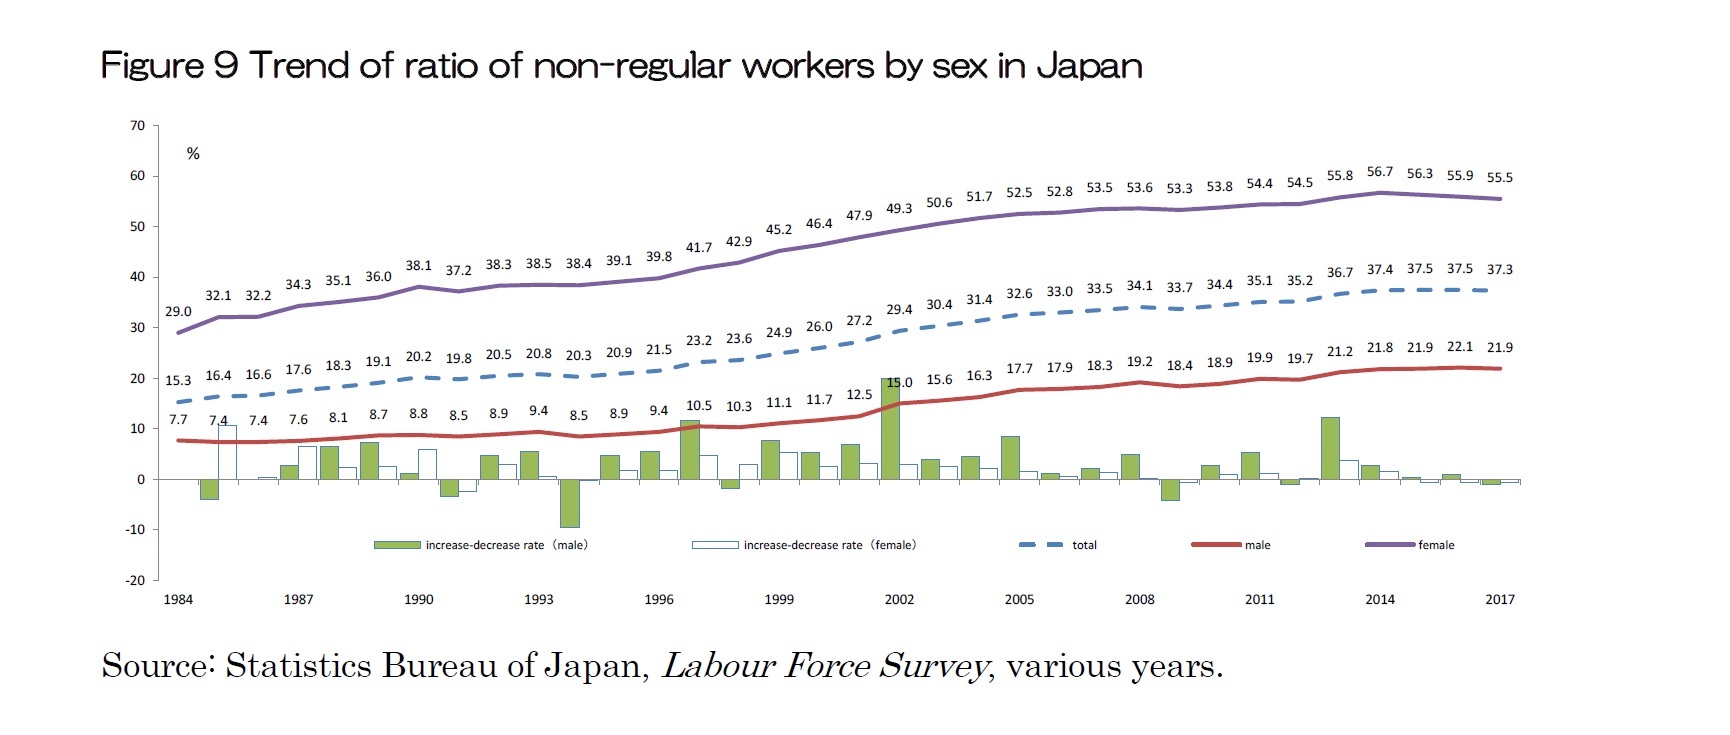 Figure 9 Trend of ratio of non-regular workers by sex in Japan